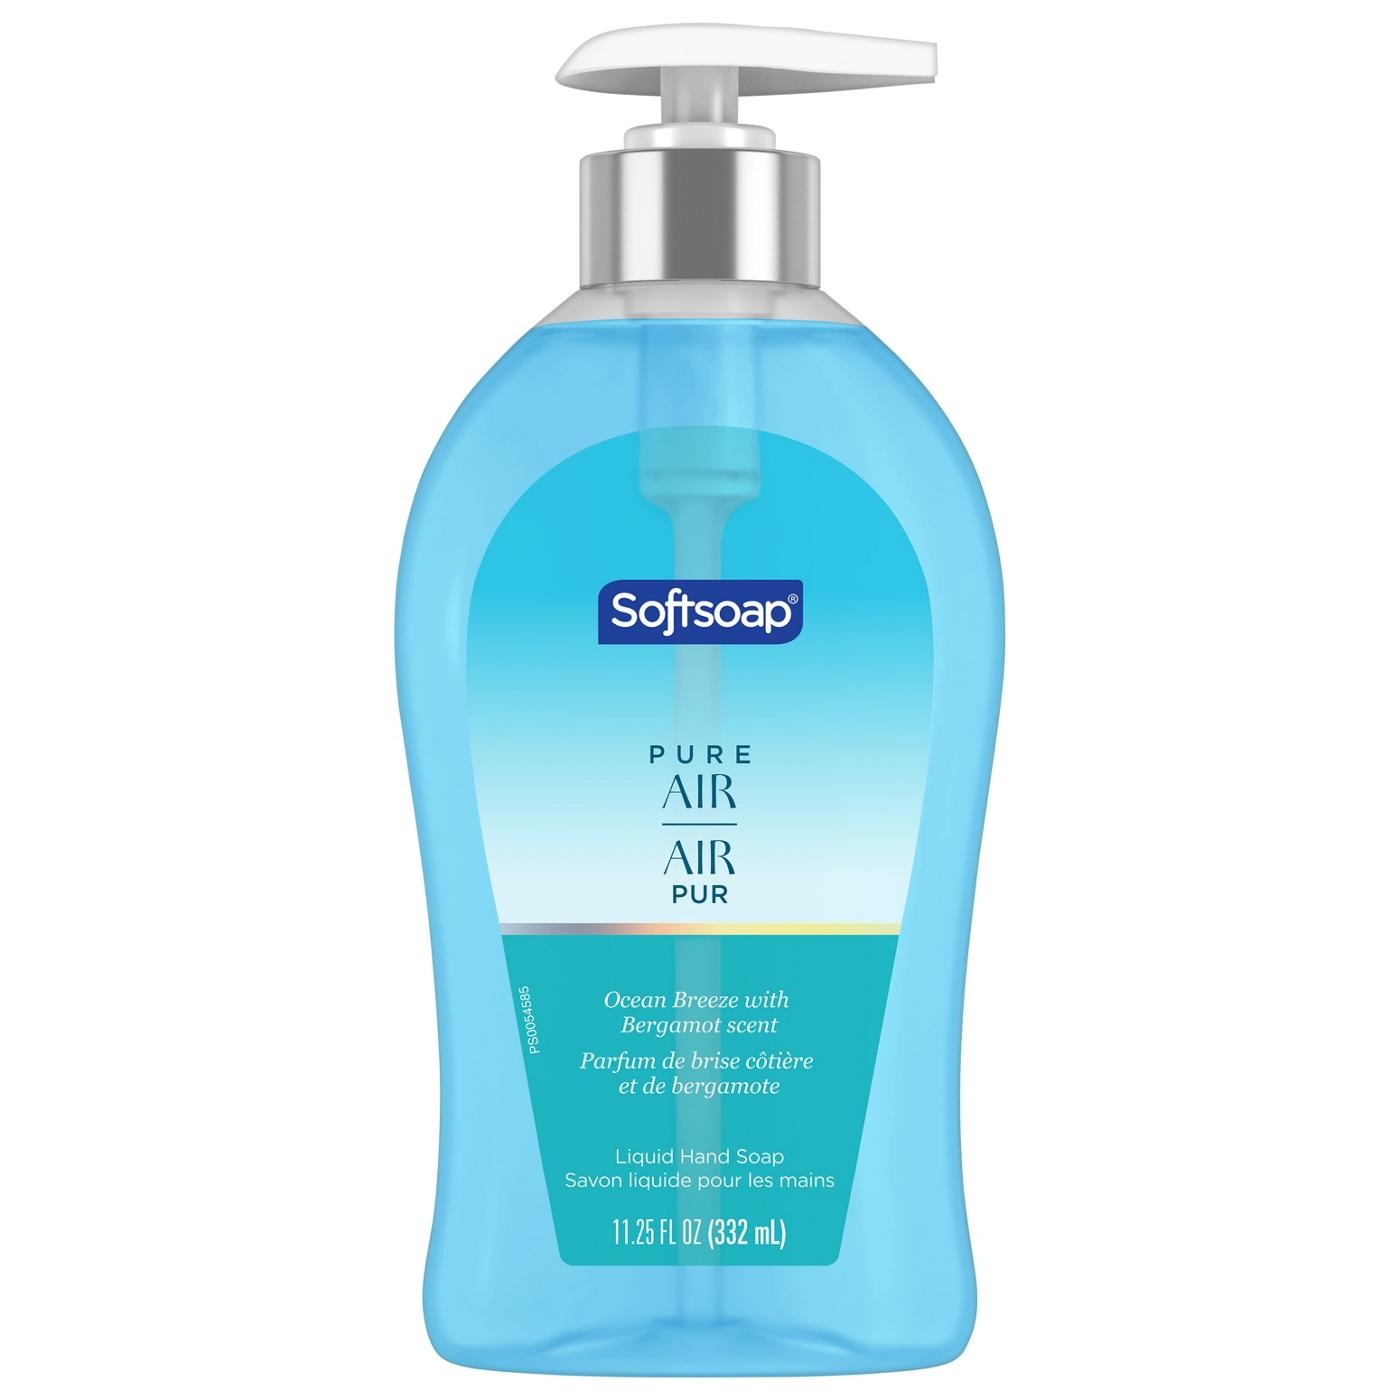 Softsoap Liquid Hand Soap - Pure Air; image 1 of 3